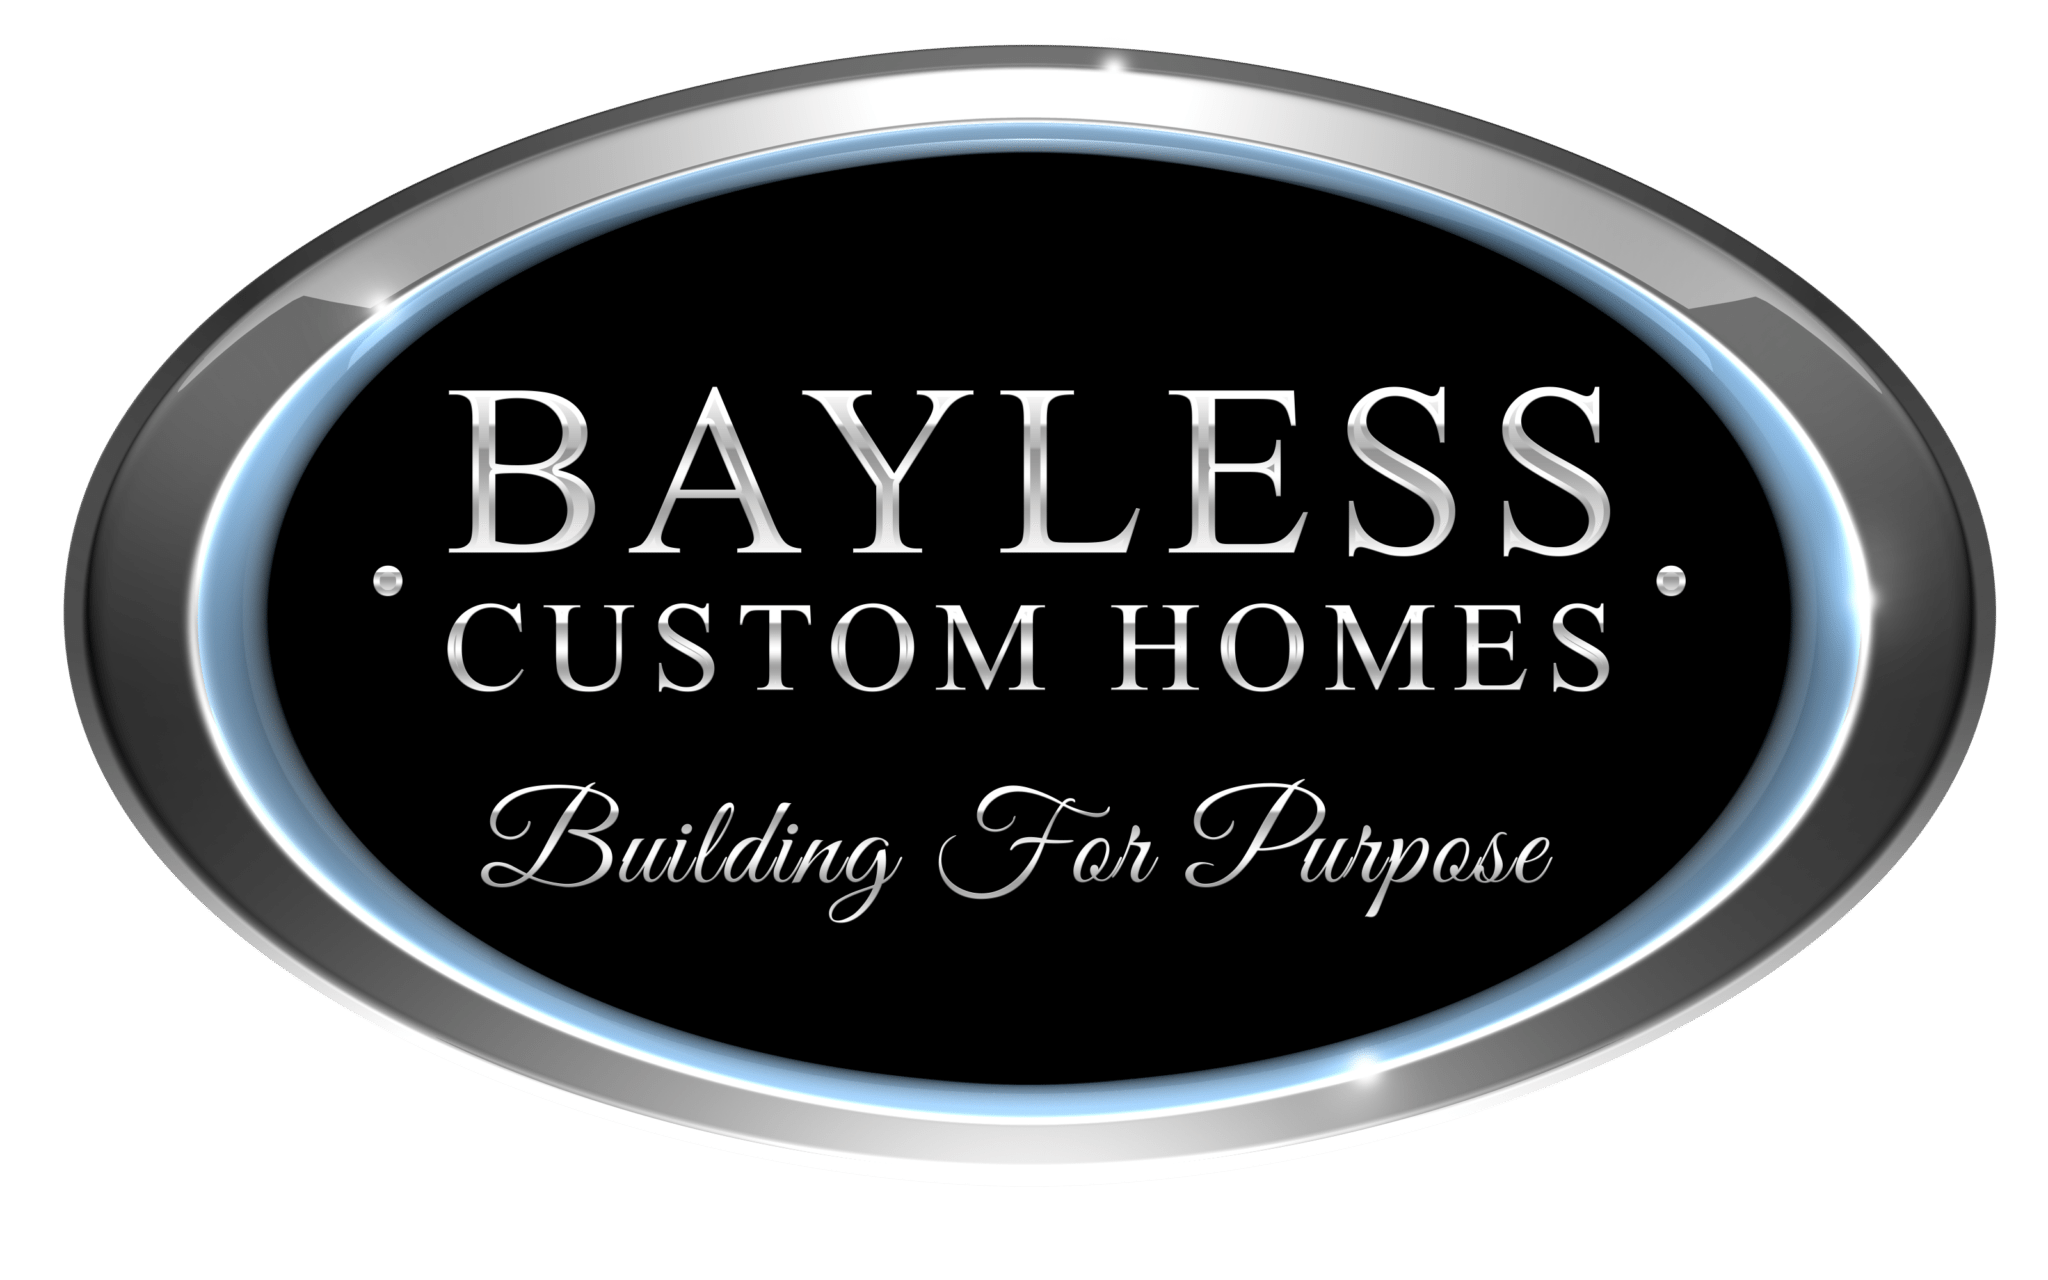 Featured image: Modern Home Builders Features Bayless Custom Homes